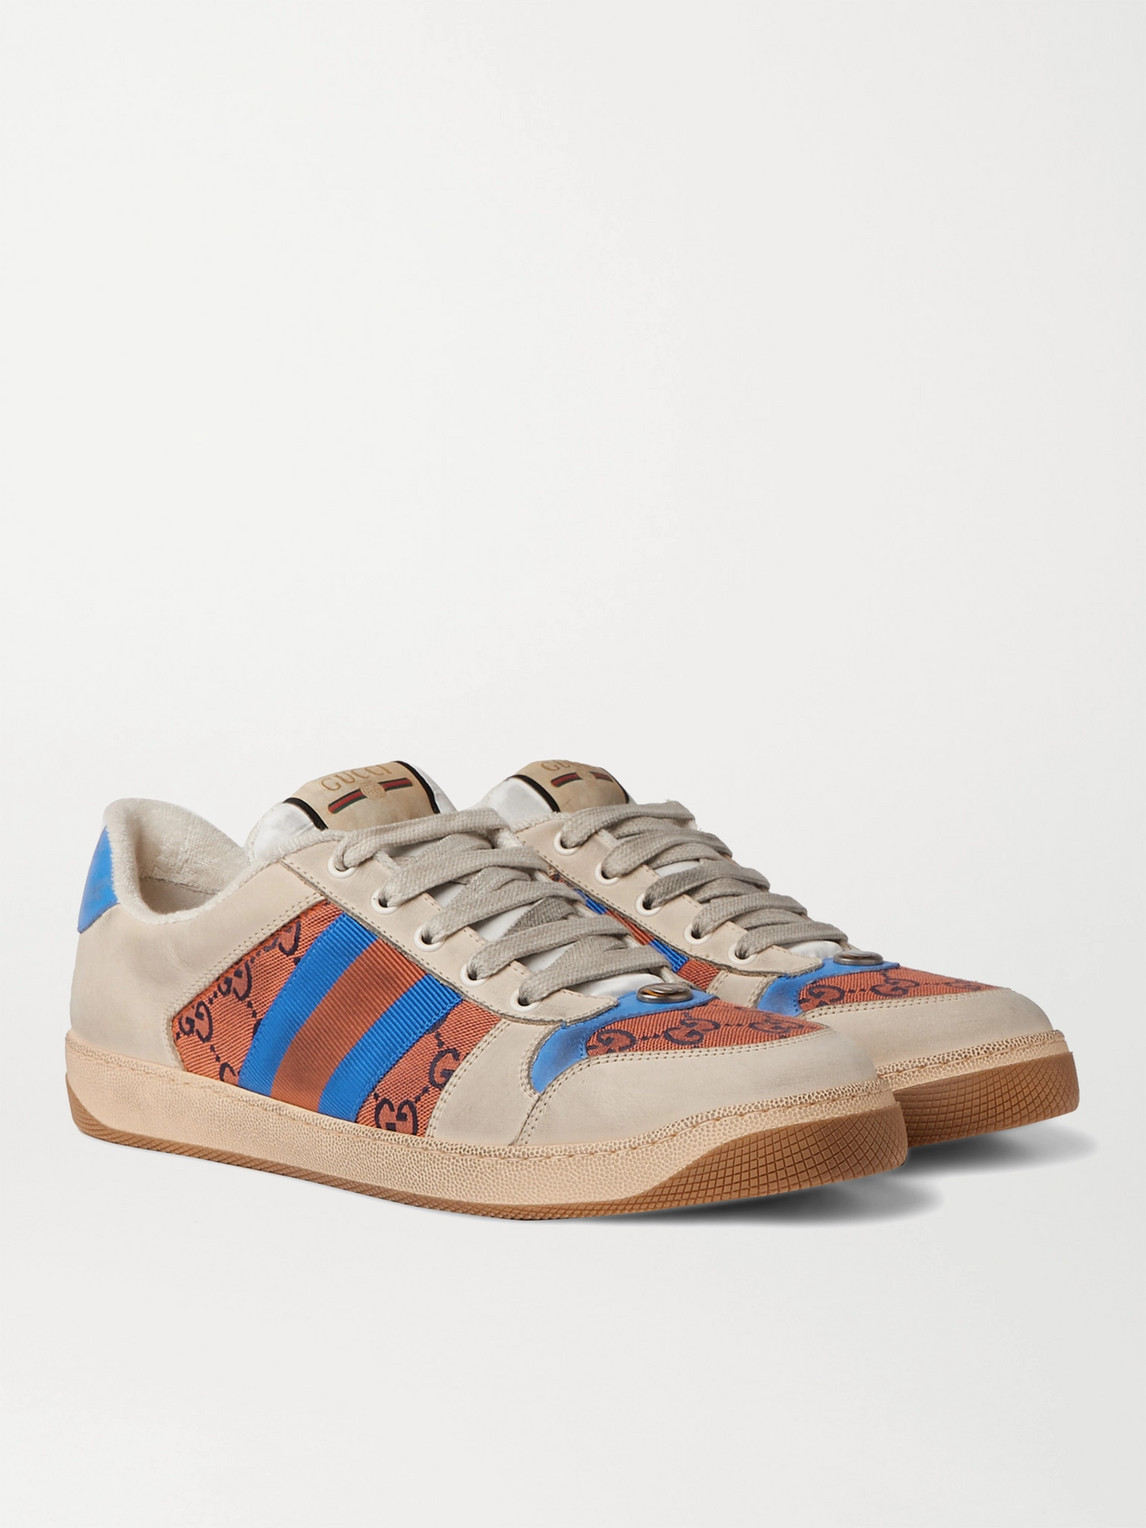 GUCCI SCREENER GG WEBBING-TRIMMED DISTRESSED LEATHER AND PRINTED CANVAS SNEAKERS